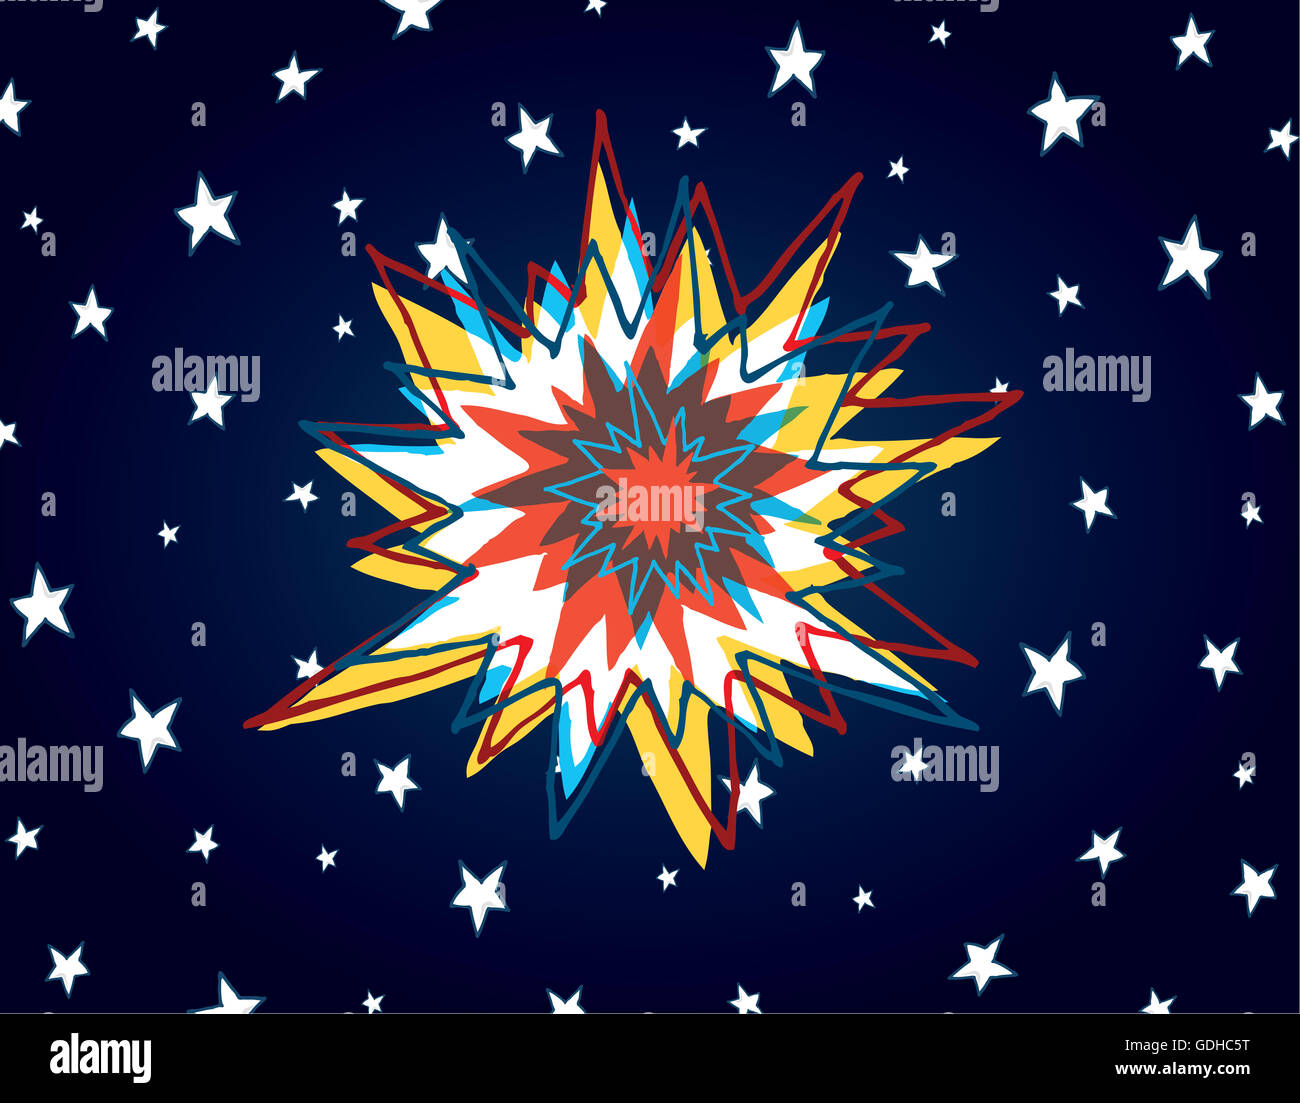 Cartoon illustration of big bang or powerful explosion in space Stock Photo